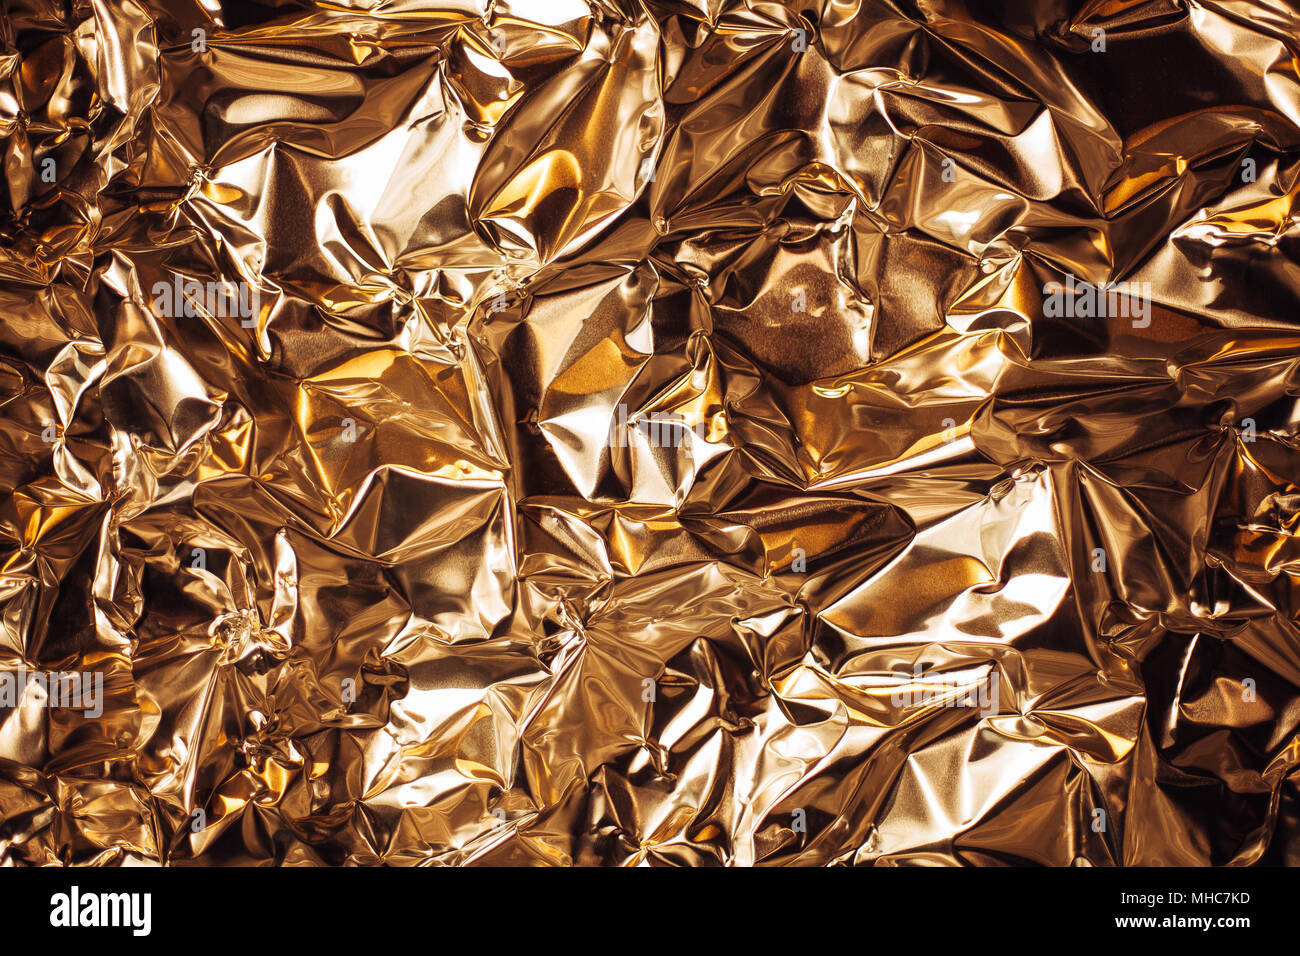 Full Frame Take Of A Sheet Of Crumpled Gold Aluminum Foil Stock Photo -  Download Image Now - iStock